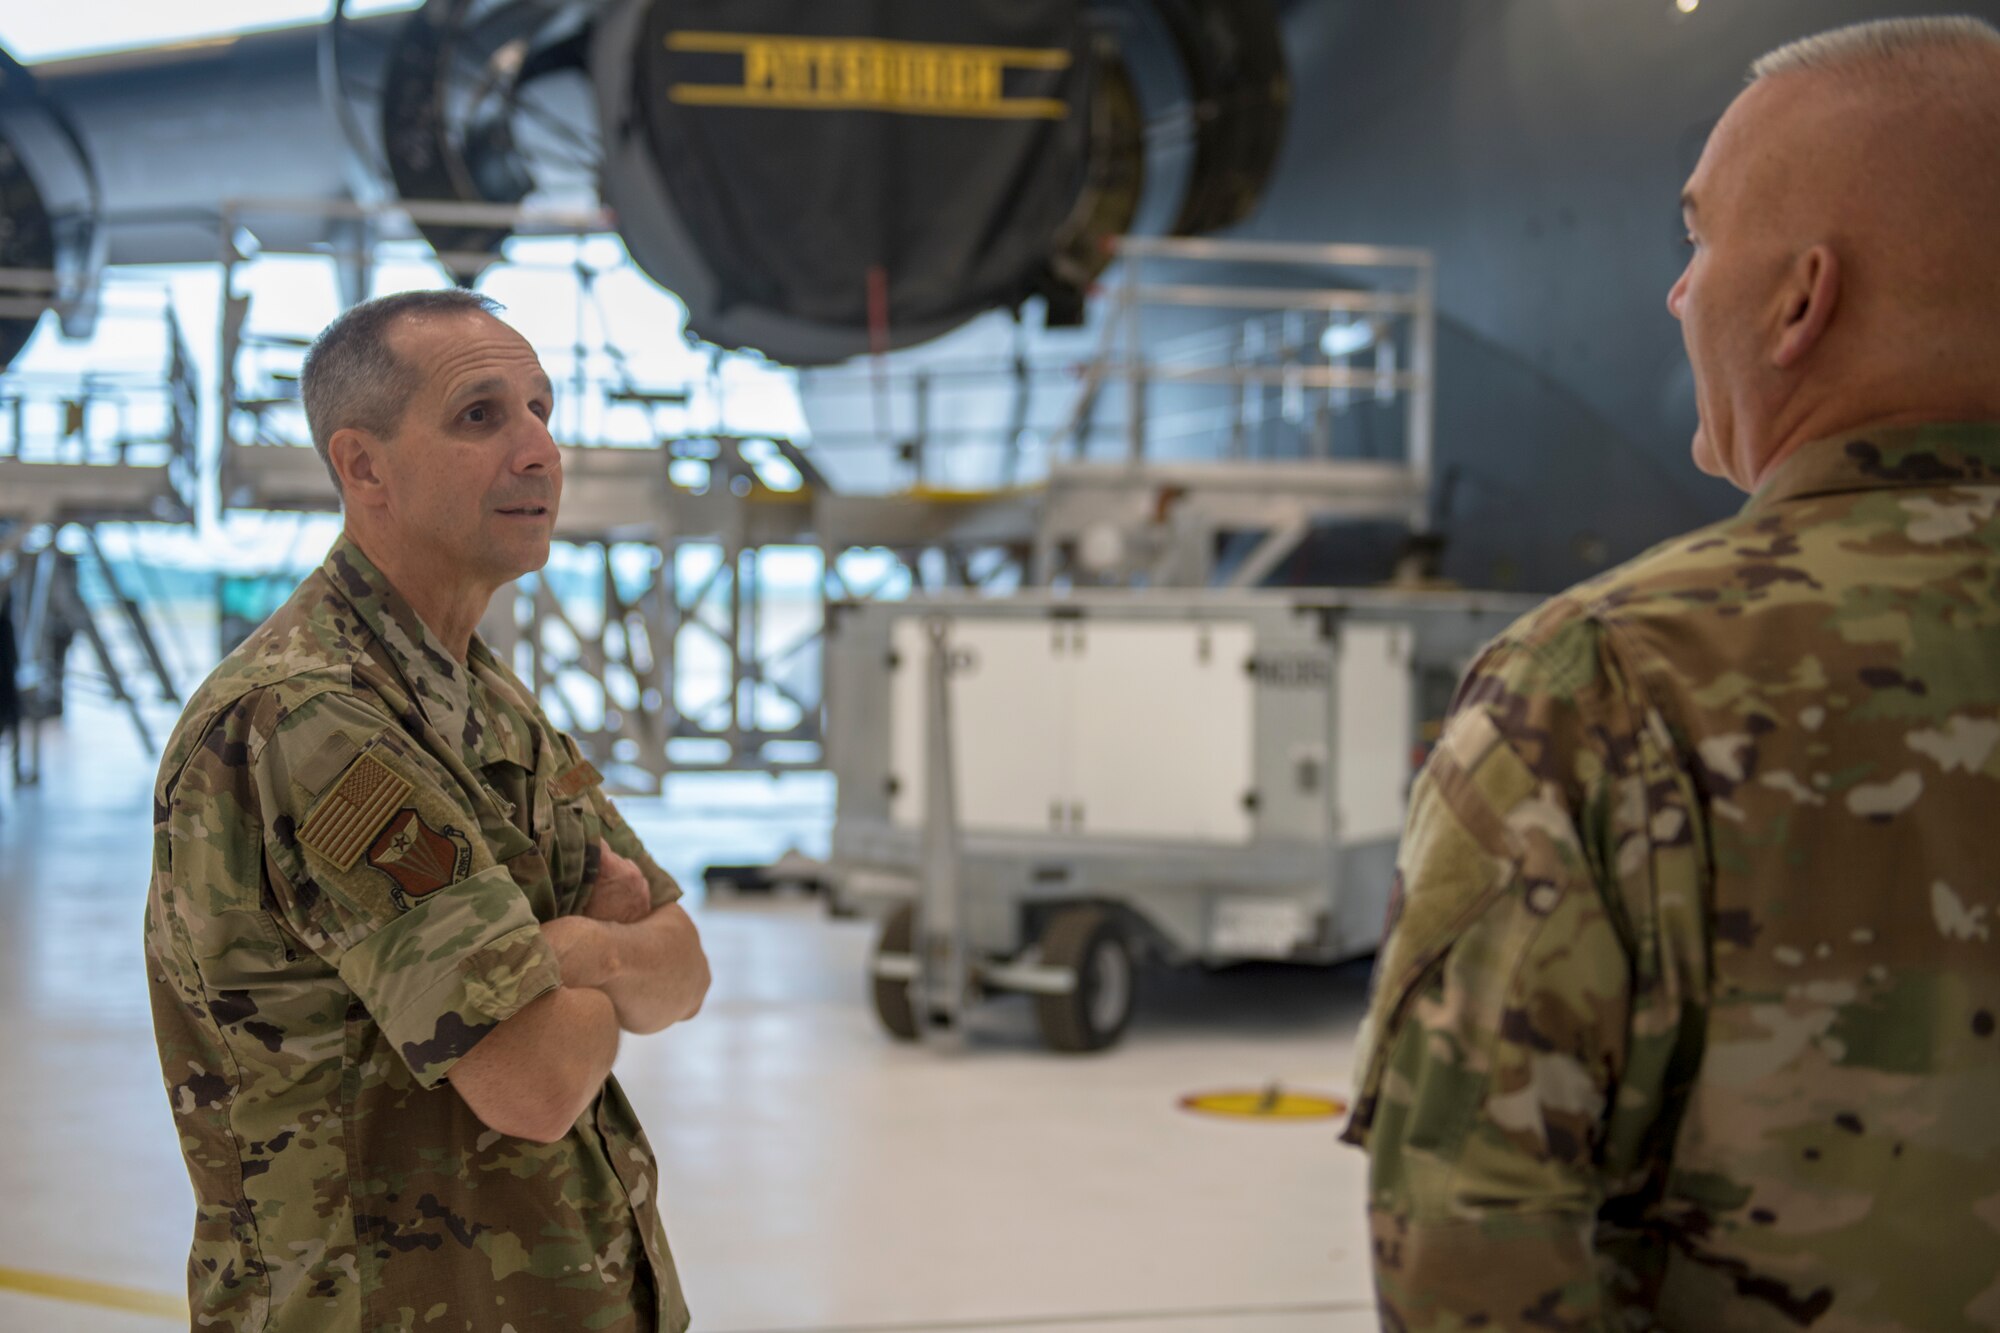 Brig. Gen. Jeffrey T. Pennington, 4th Air Force commander, speaks with Airmen of the 911th Maintenance Group at the Pittsburgh International Airport Air Reserve Station, Pennsylvania, July 11, 2020.